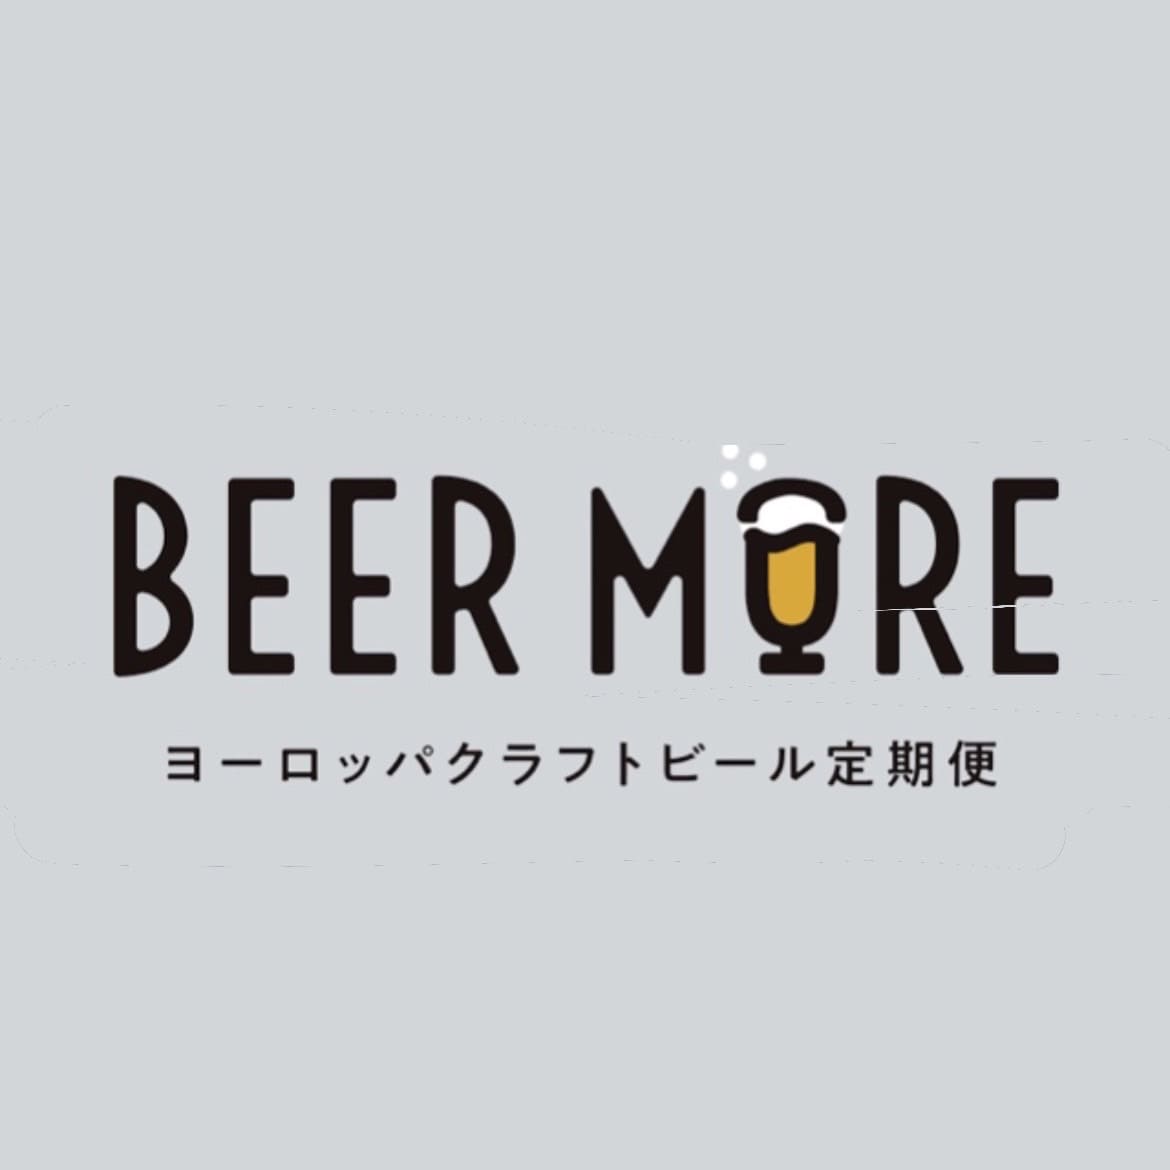 BEER MORE(ビアモア）